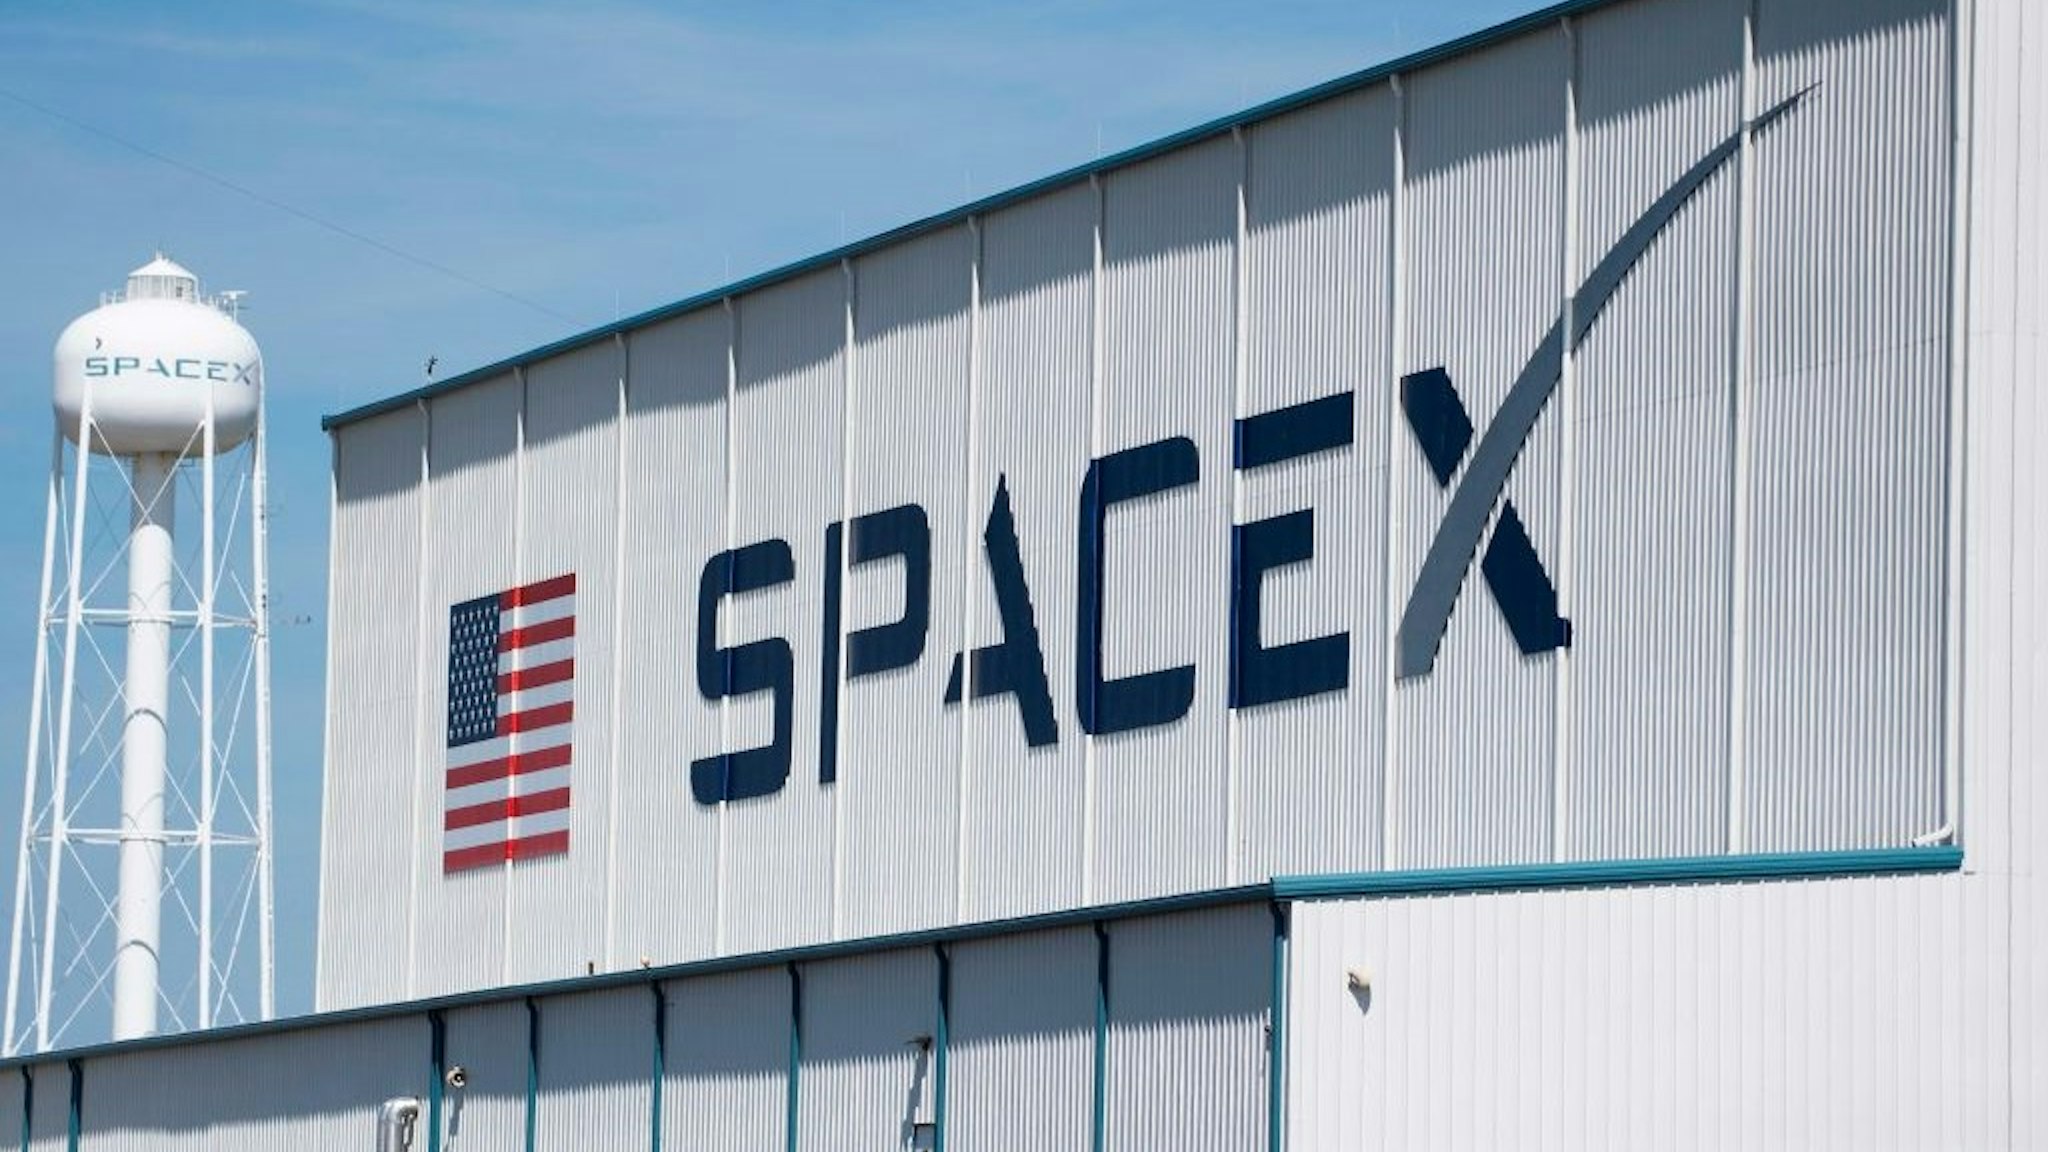 The SpaceX hangar on Pad 39A on March 1, 2019, at Kennedy Space Center in Florida on March 1, 2019.